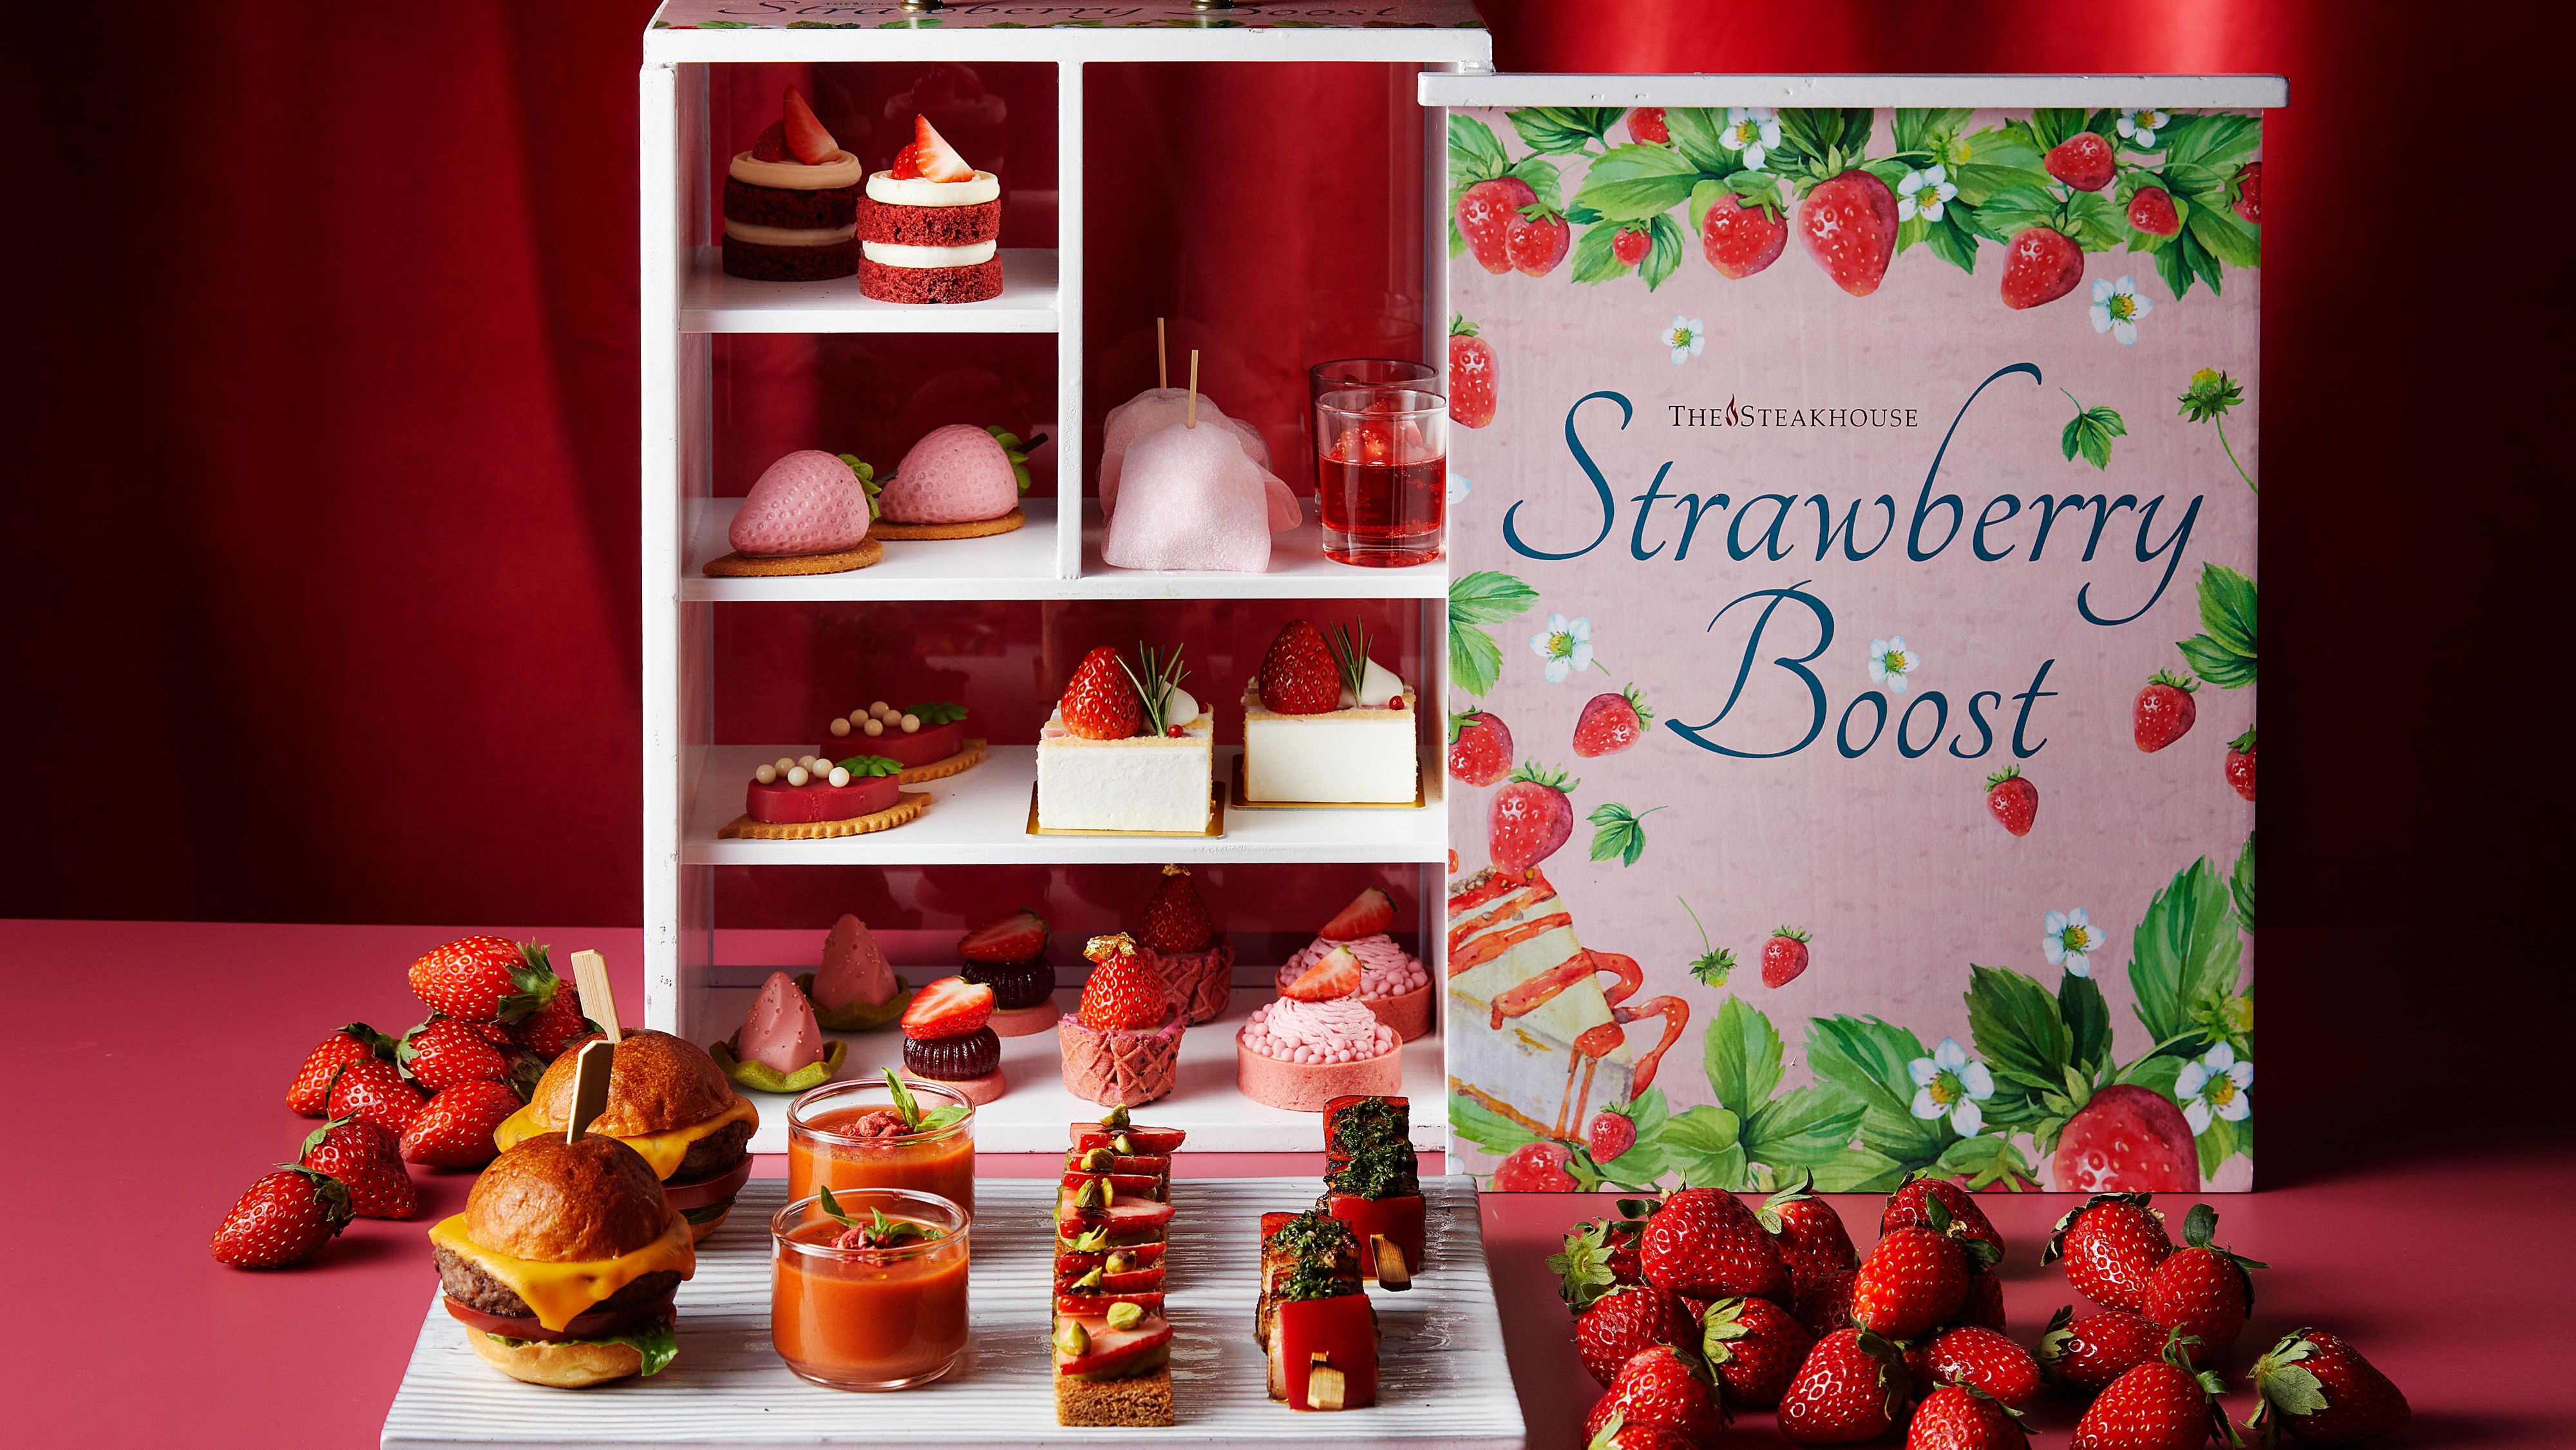 Strawberry Afternoon Tea Boost